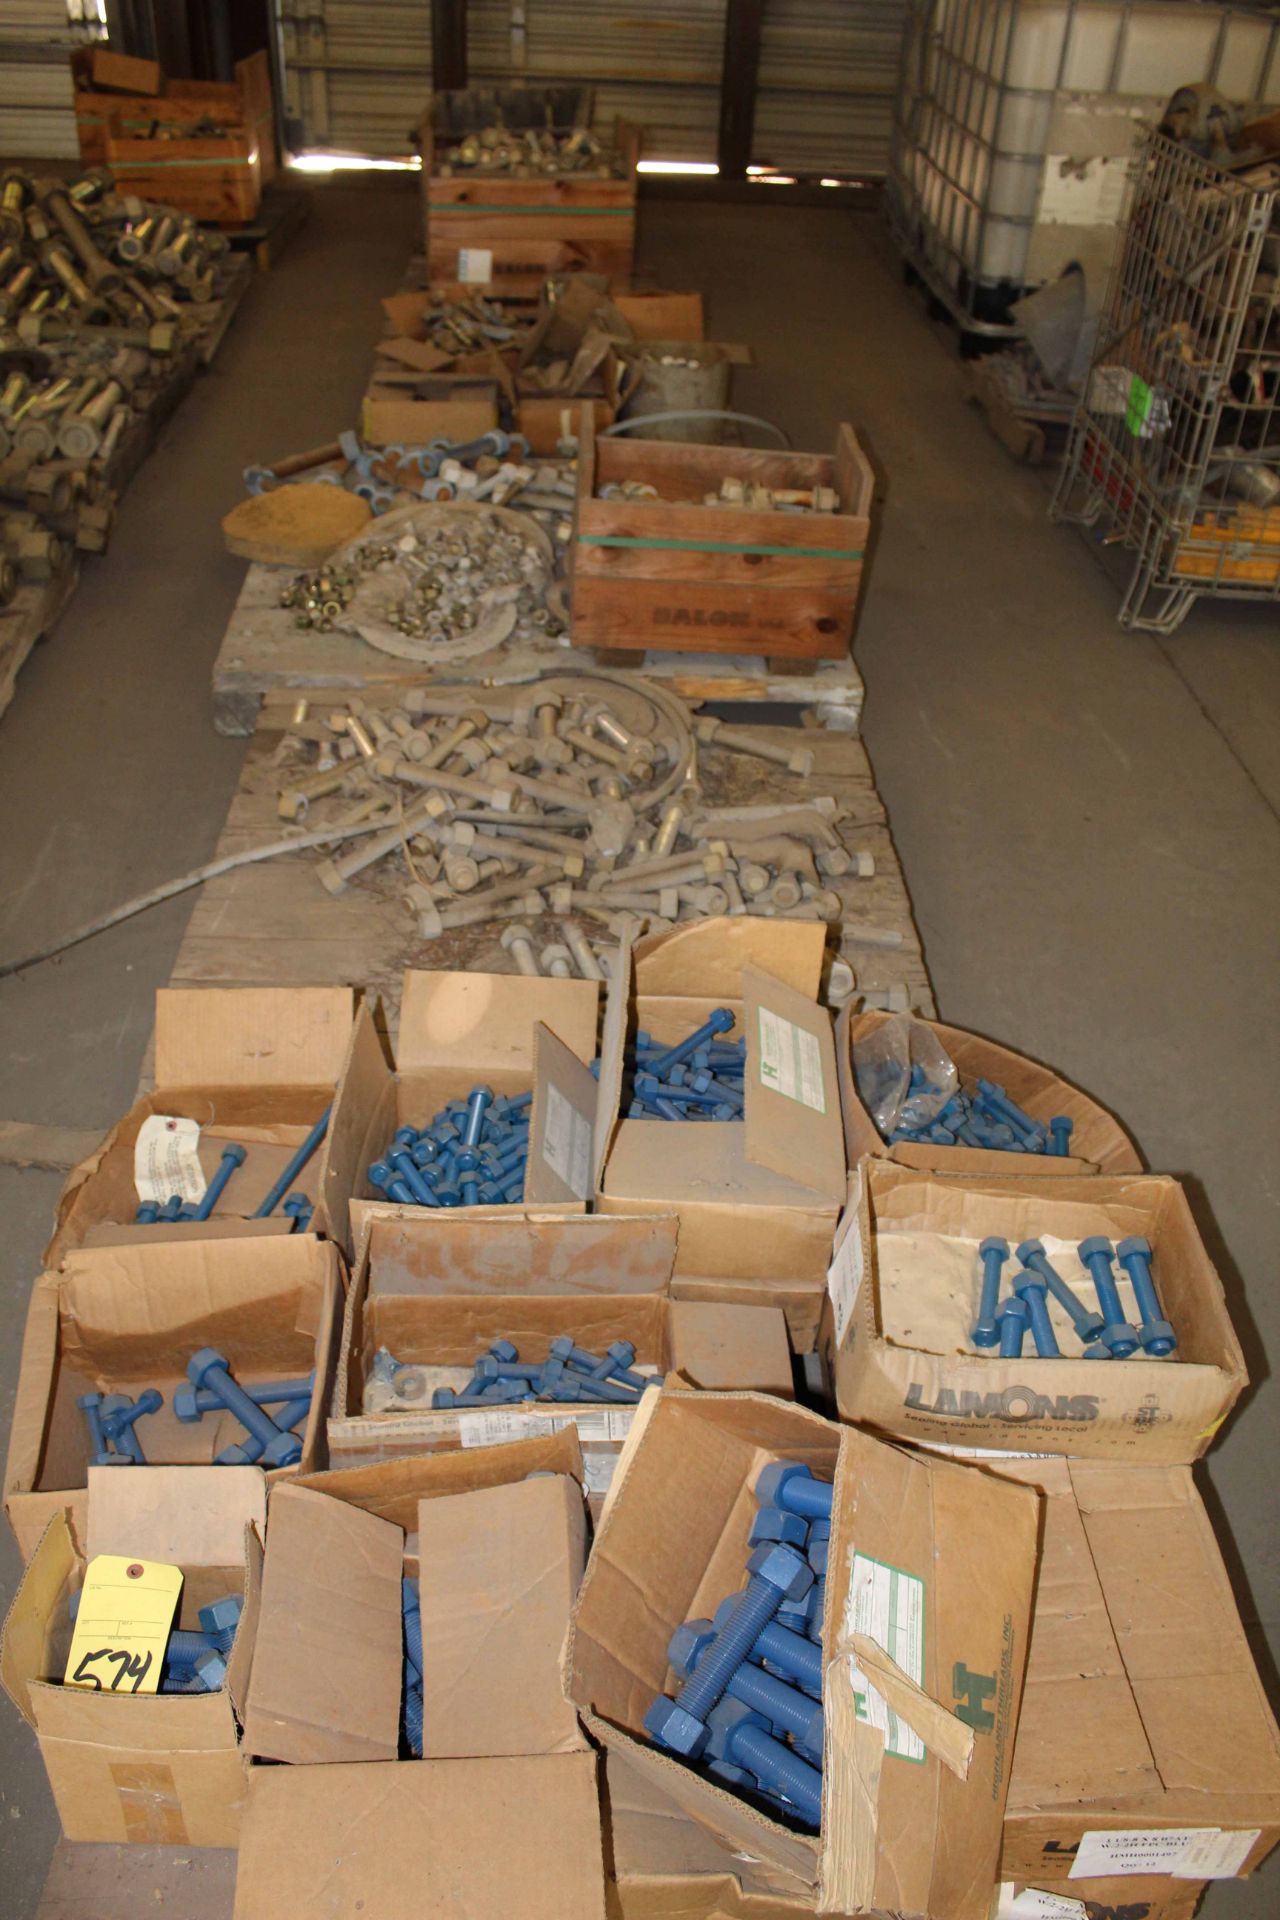 LOT CONSISTING OF: fasteners & studs